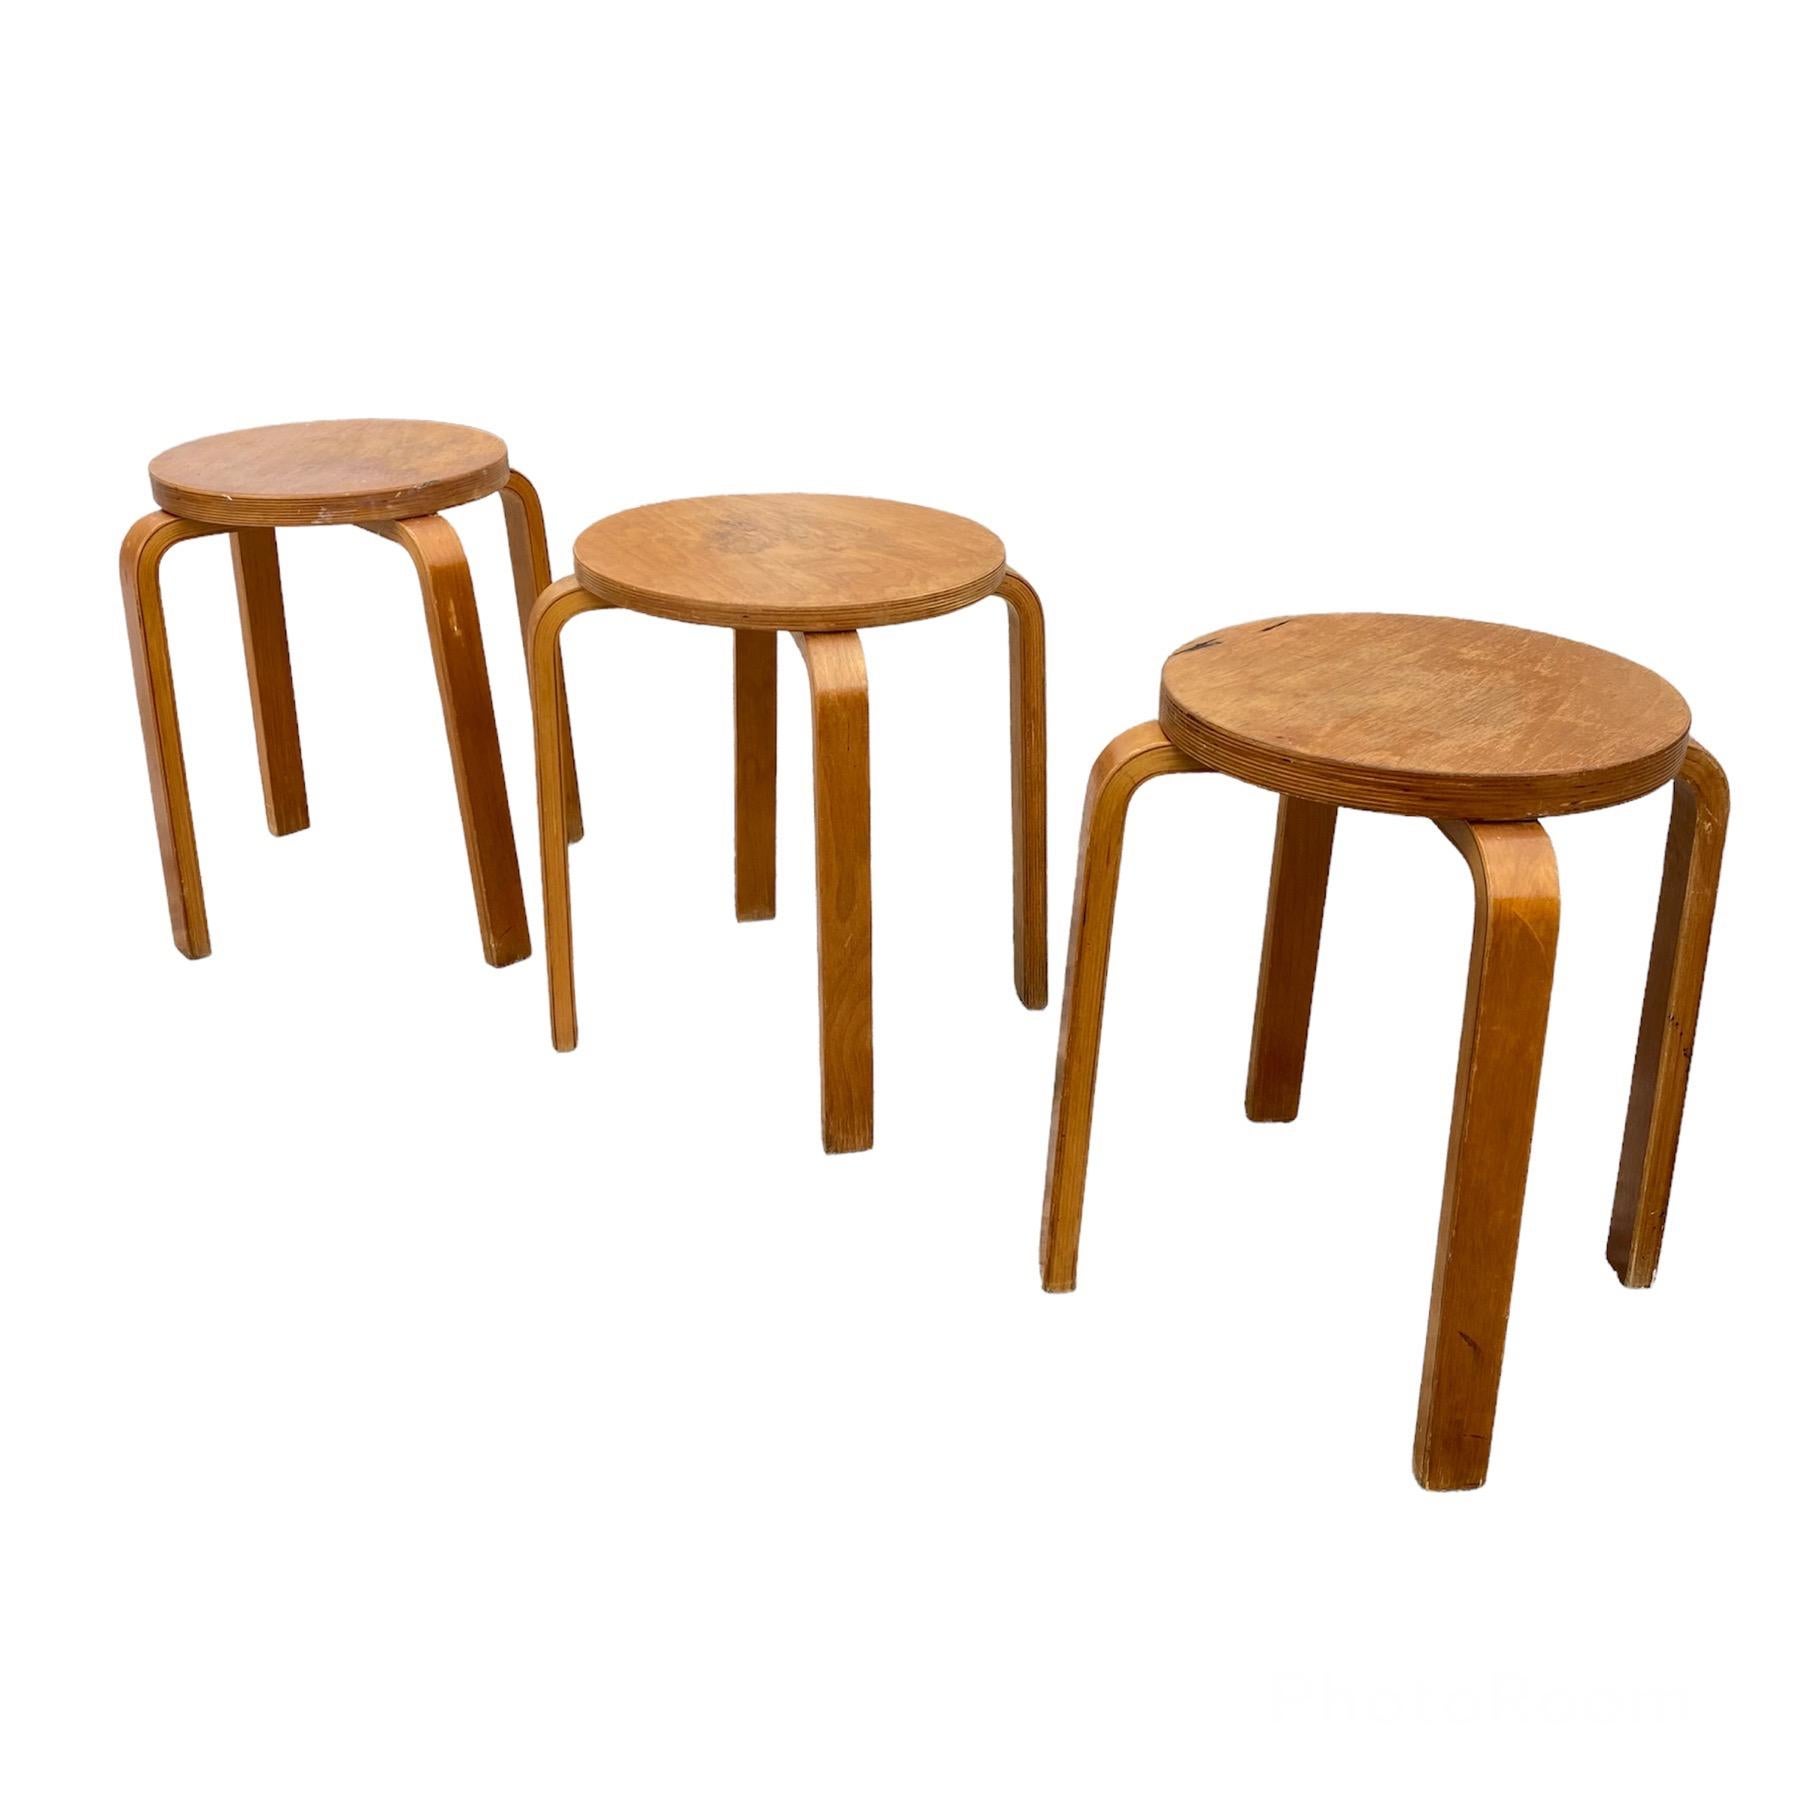 Alvar Aalto set of 3 Birch Stools for Artek, Finland, 1960
 
Iconic set of 3 Stools designed by Alvar Aalto for Artek in the 1960's.
Perfect vintage conditions, slight signs of age and use.
 
Dimensions:
 
H: 46cm
D: 35cm 